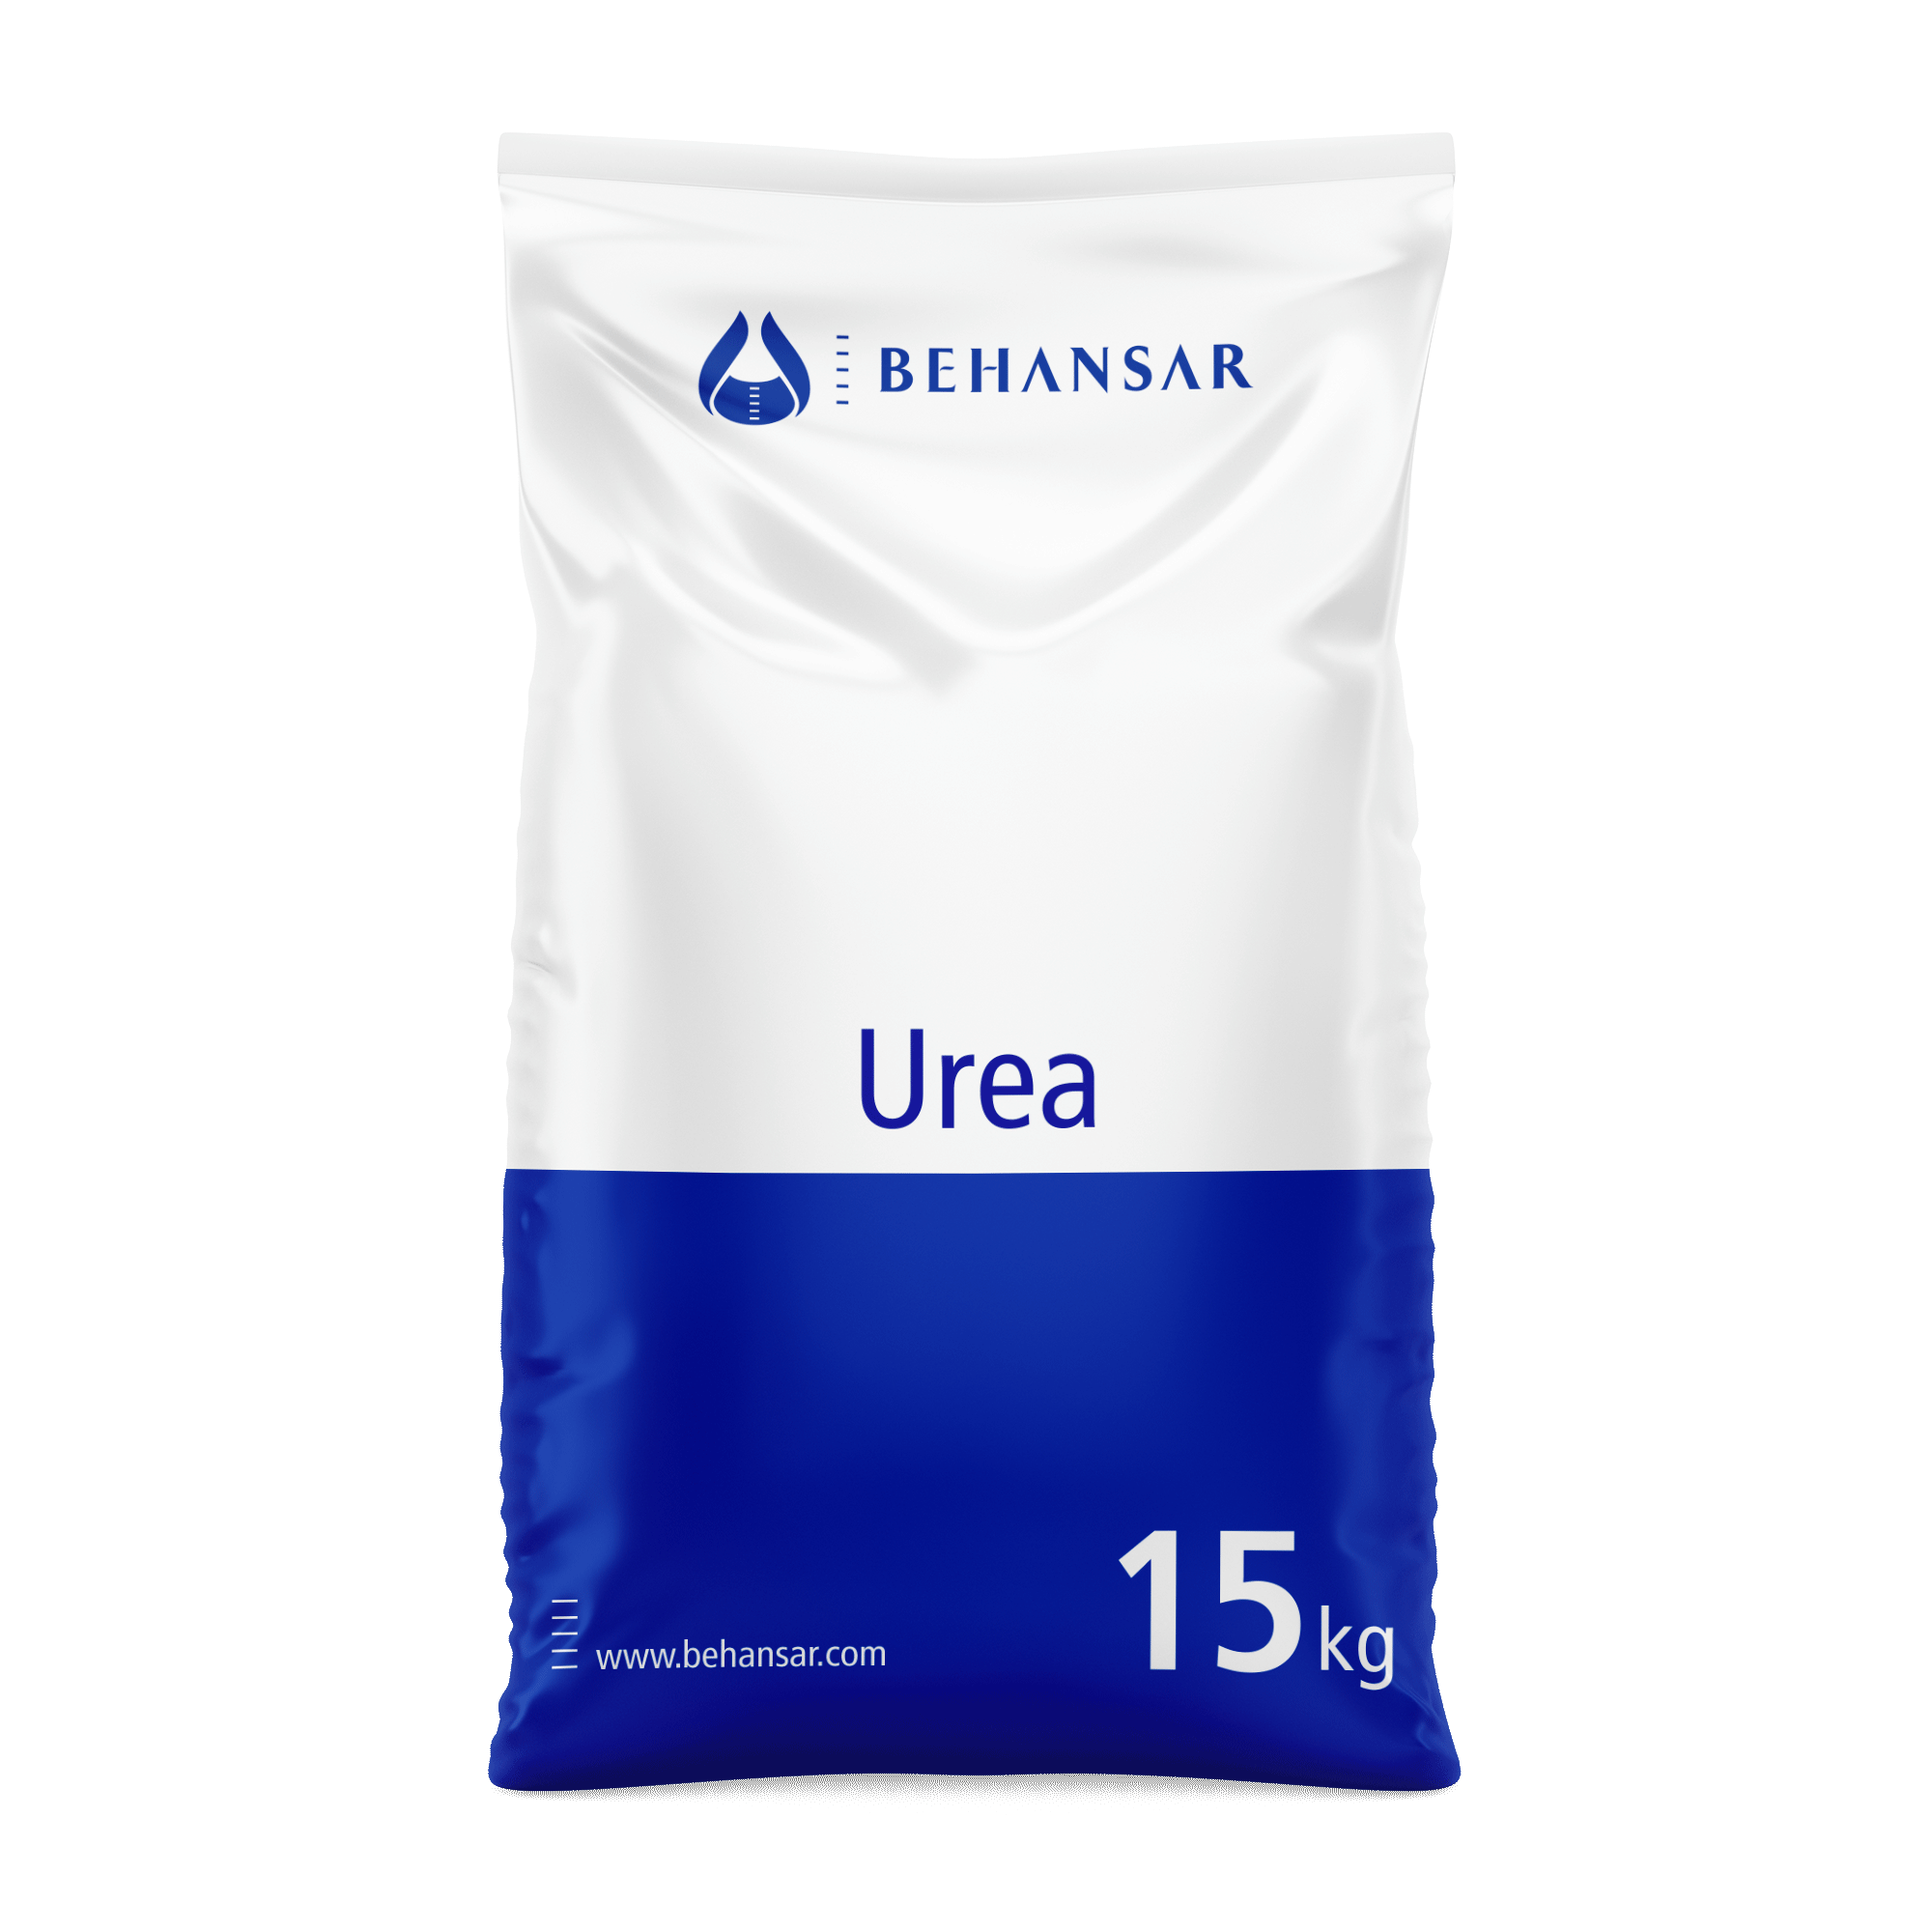 Urea is one of the products of Behansar Co